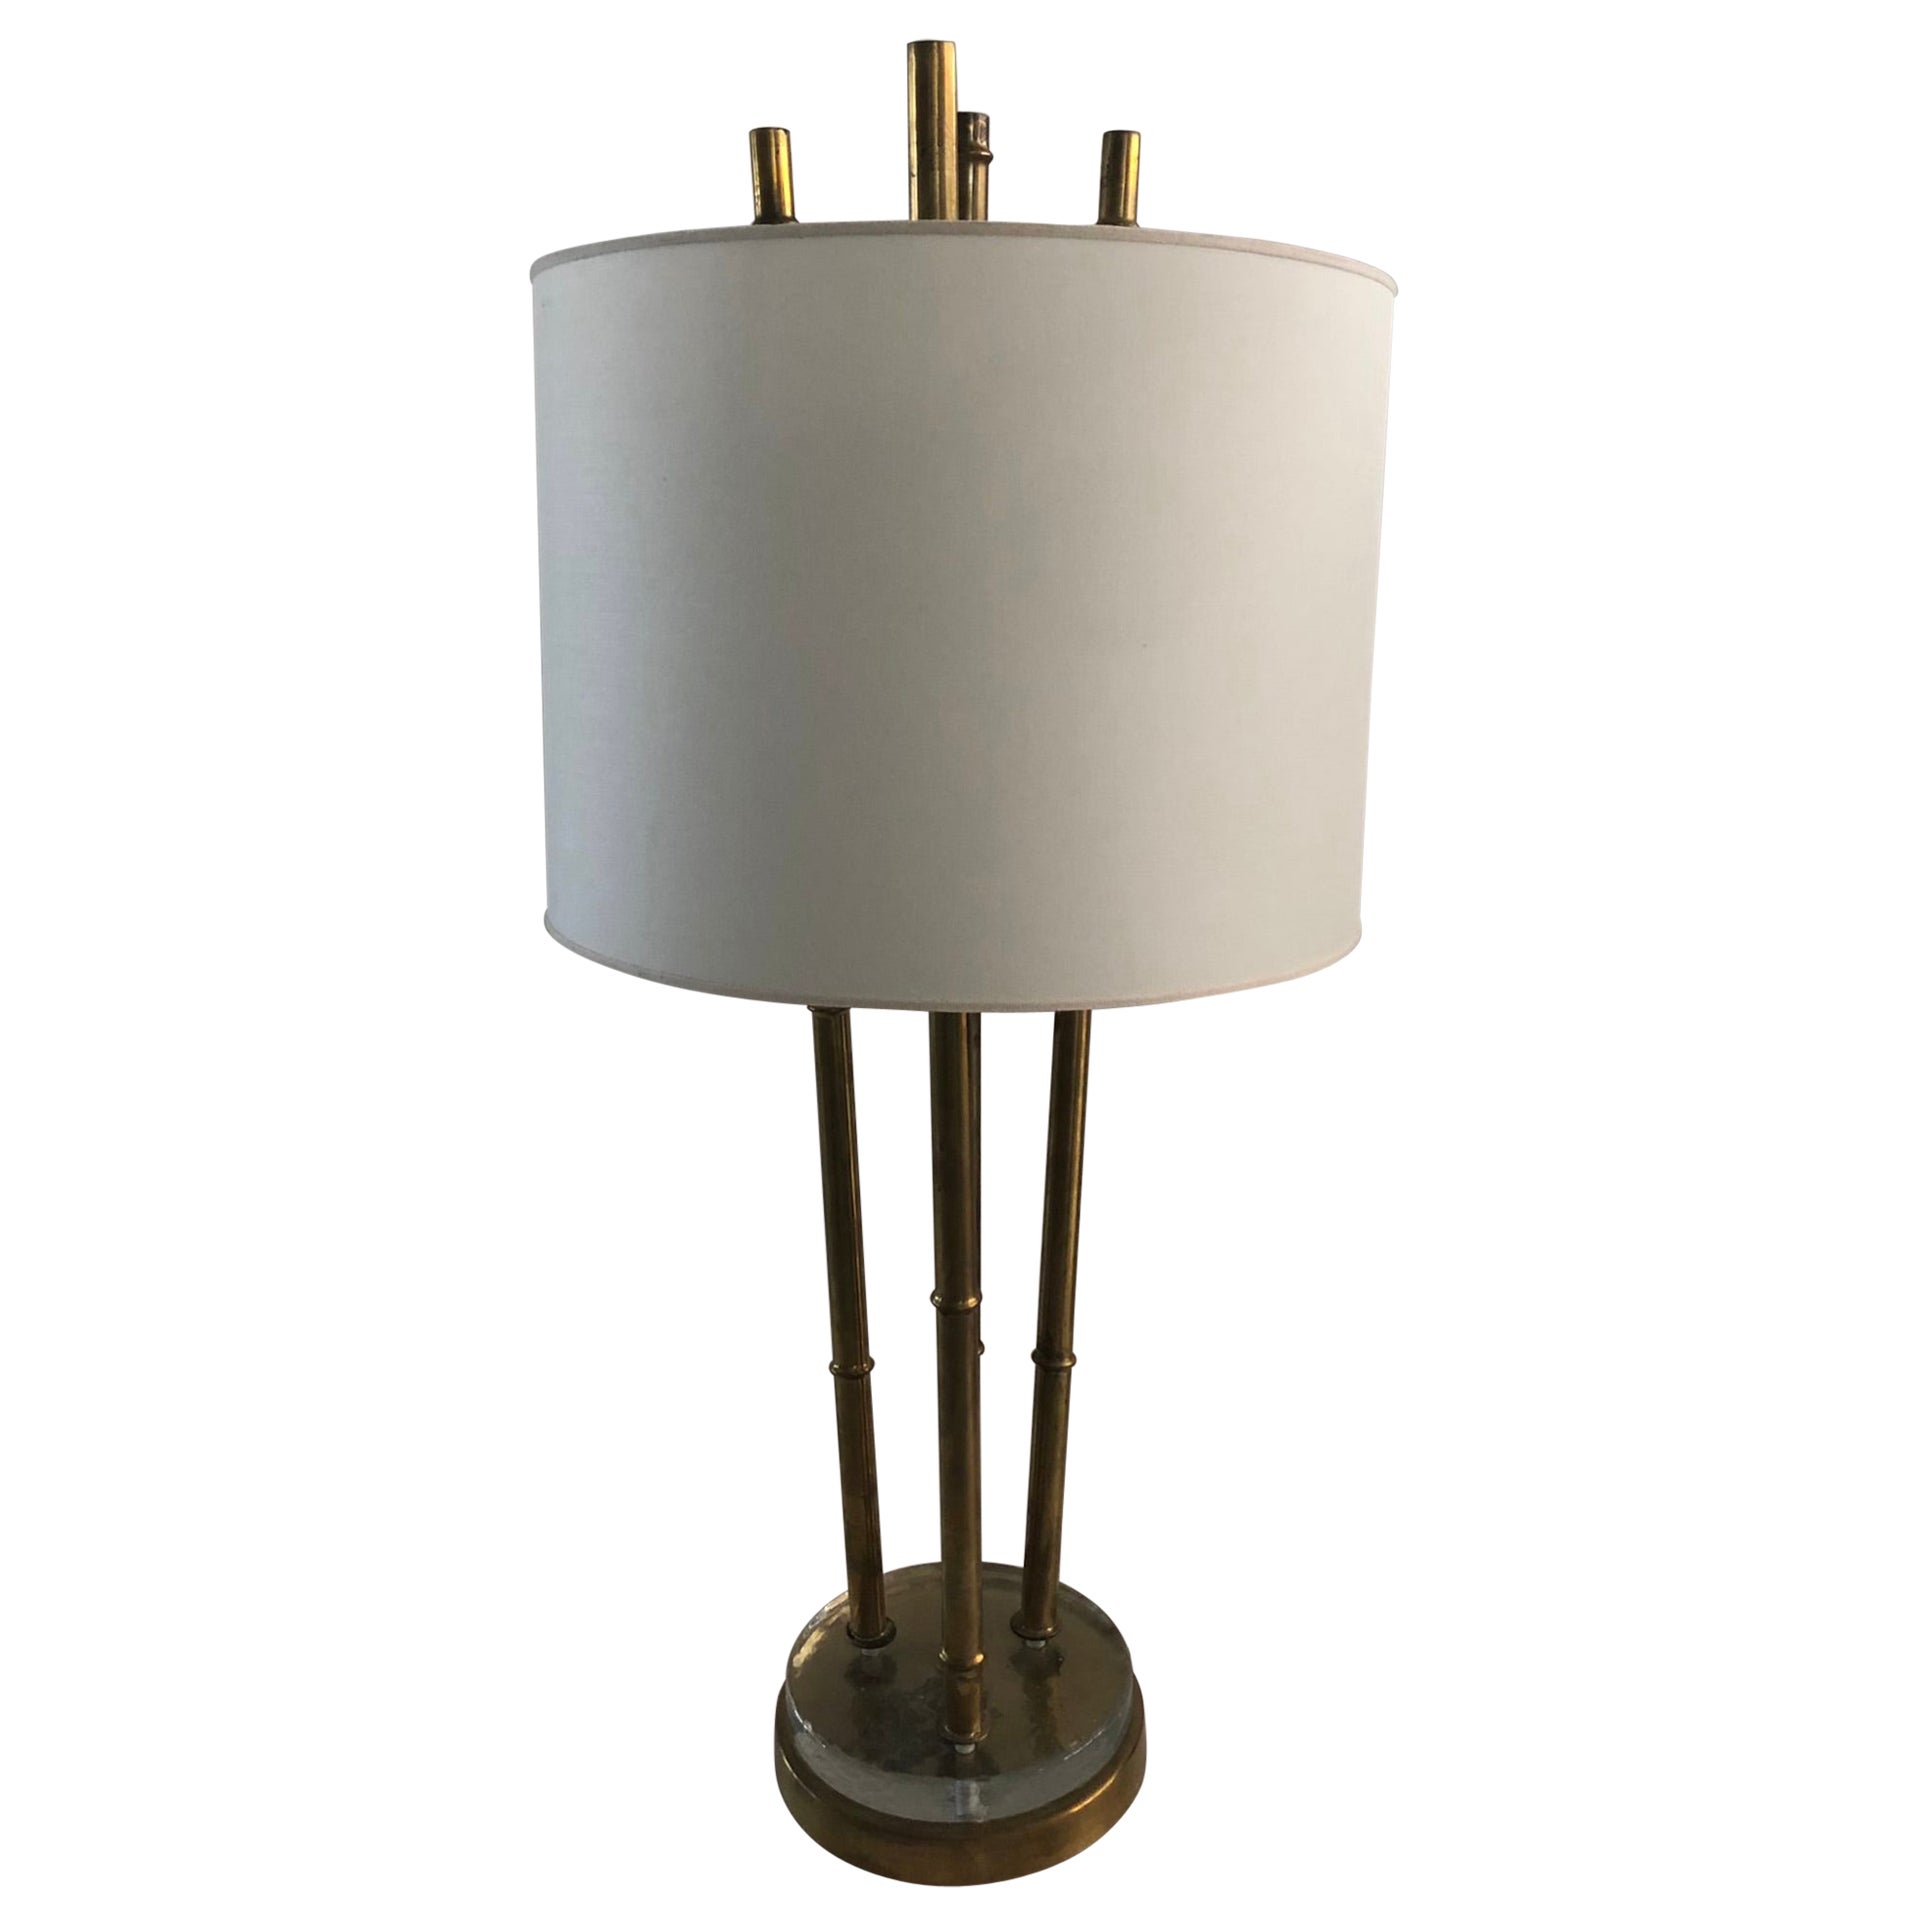 Murano Mid Century Round Brass and Glass Italian Table Lamp, 1950 For Sale